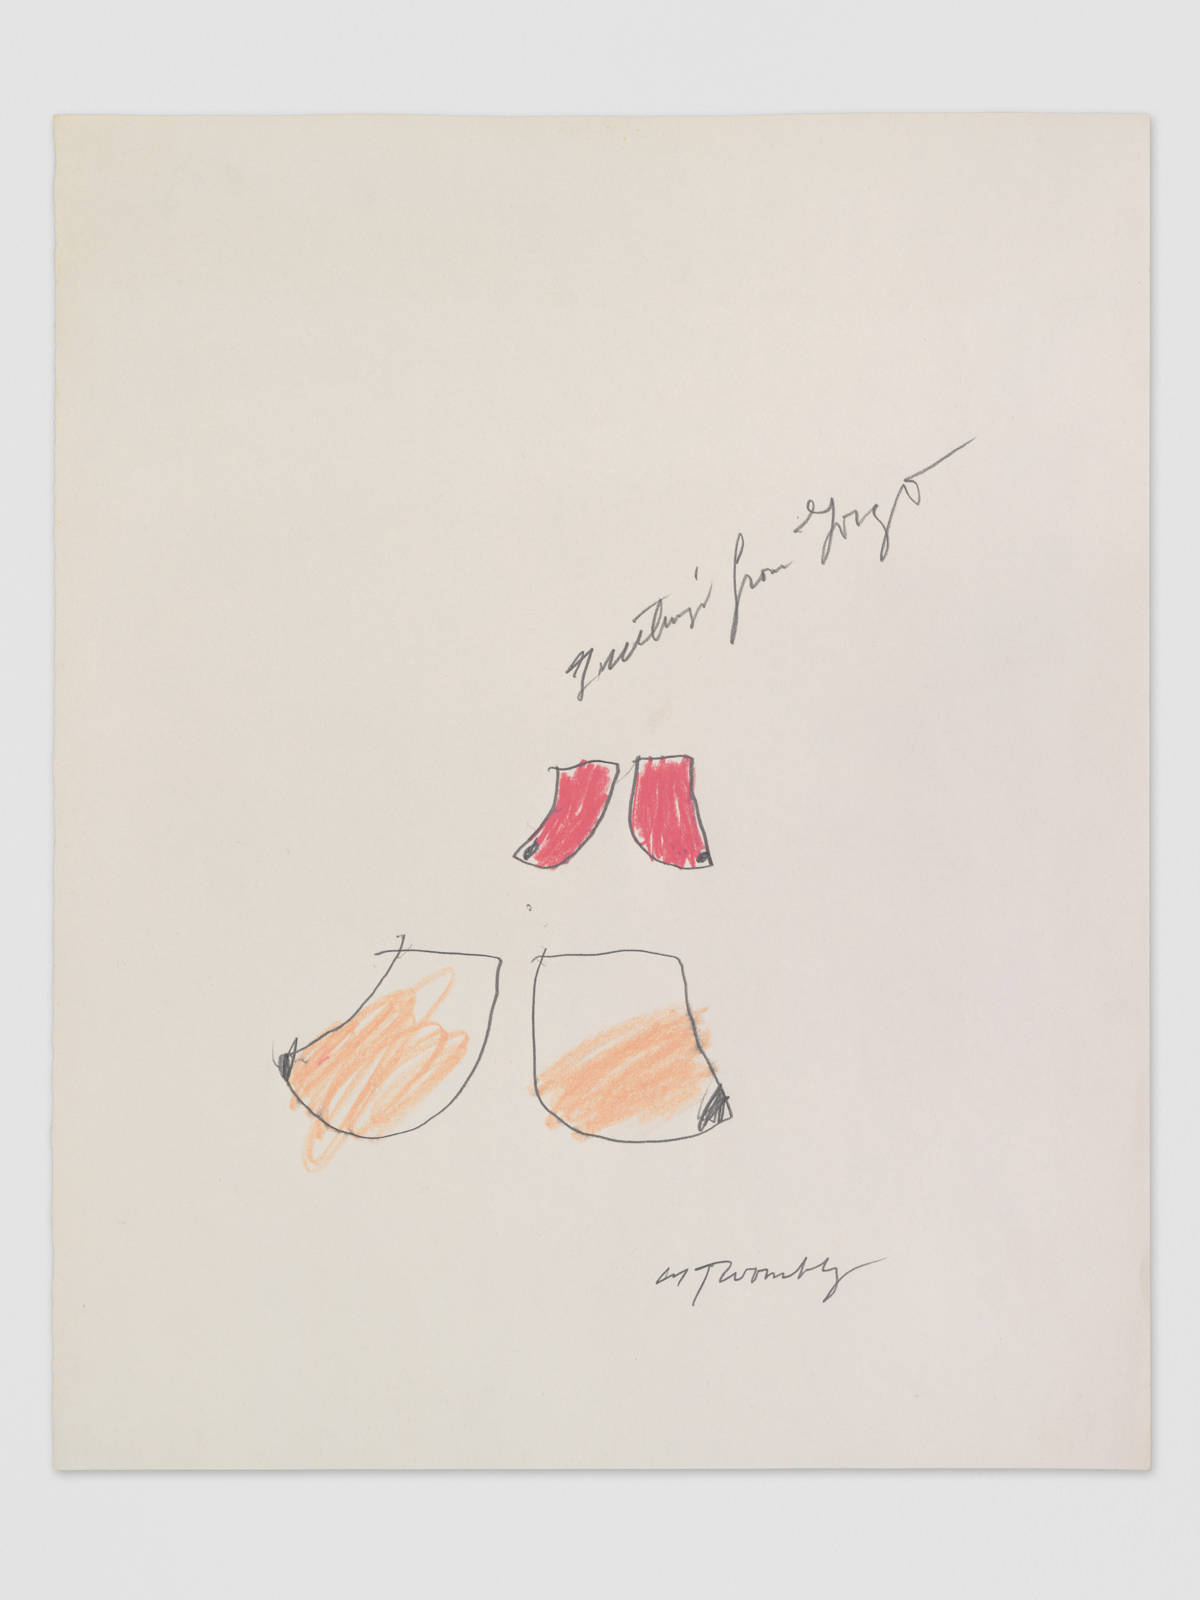 Cy Twombly / Cy Twombly Foundation